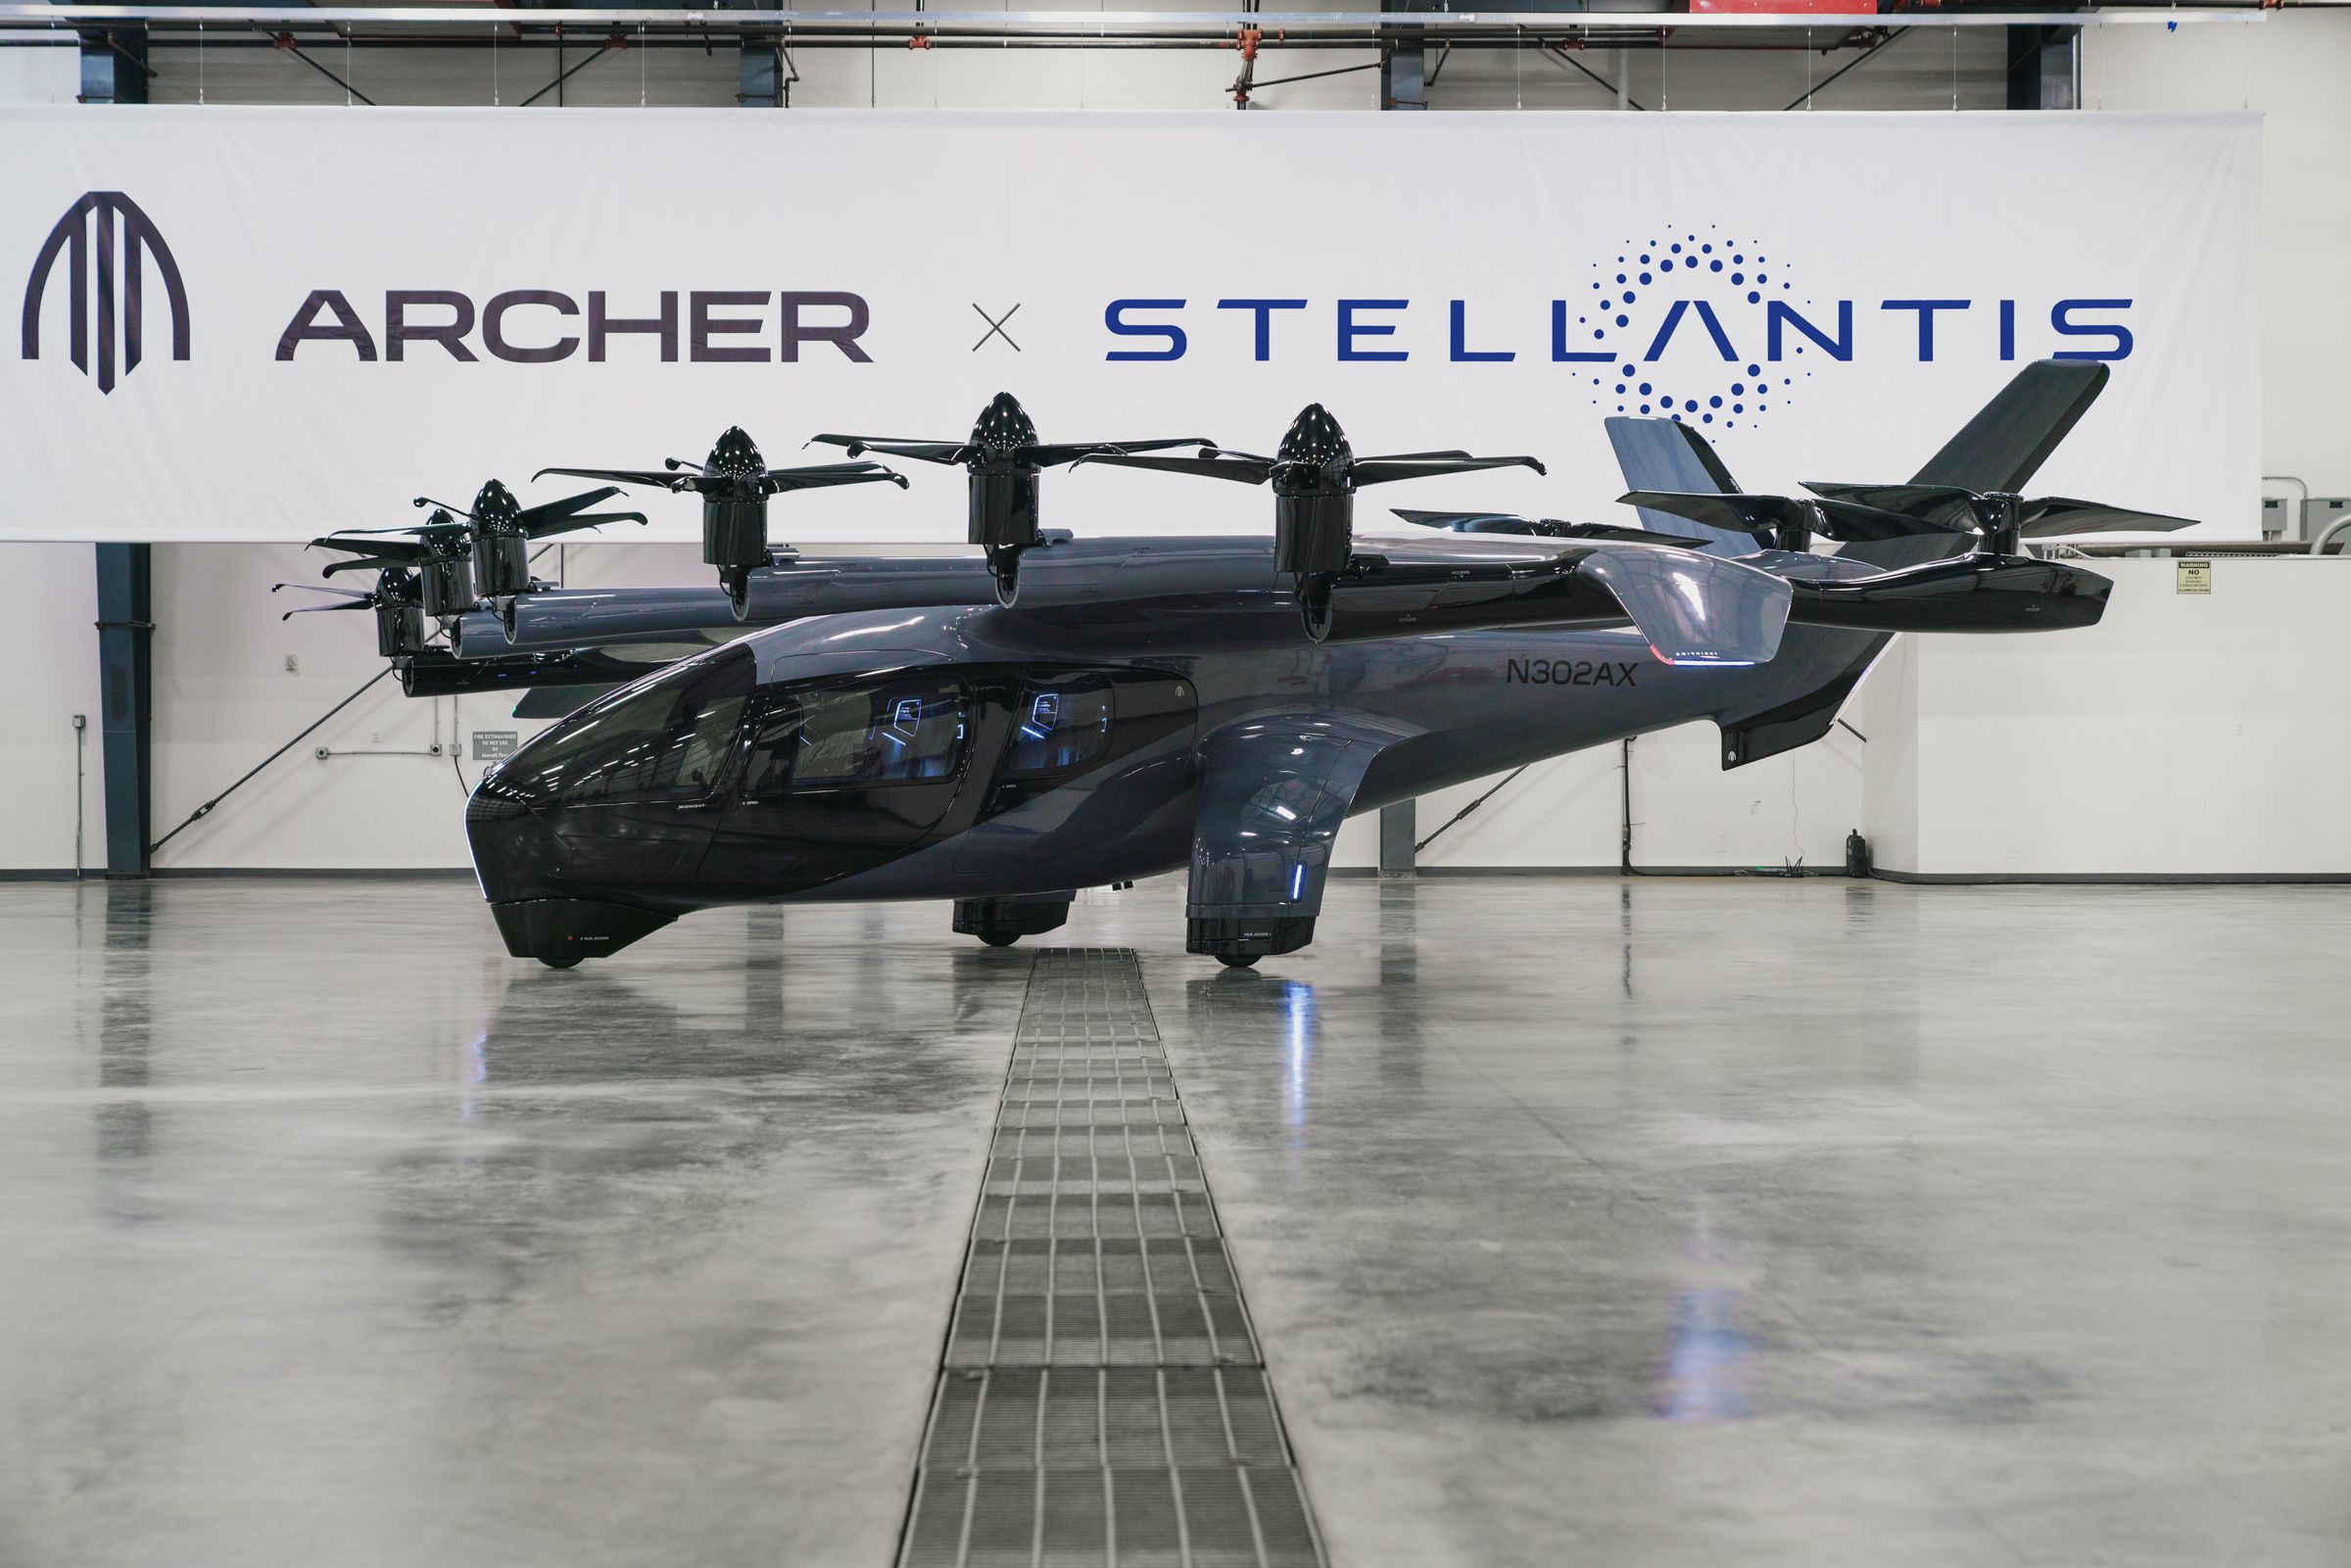 Archer’s eVTOL aircraft is meant for short distance trips of 20-50 miles. 